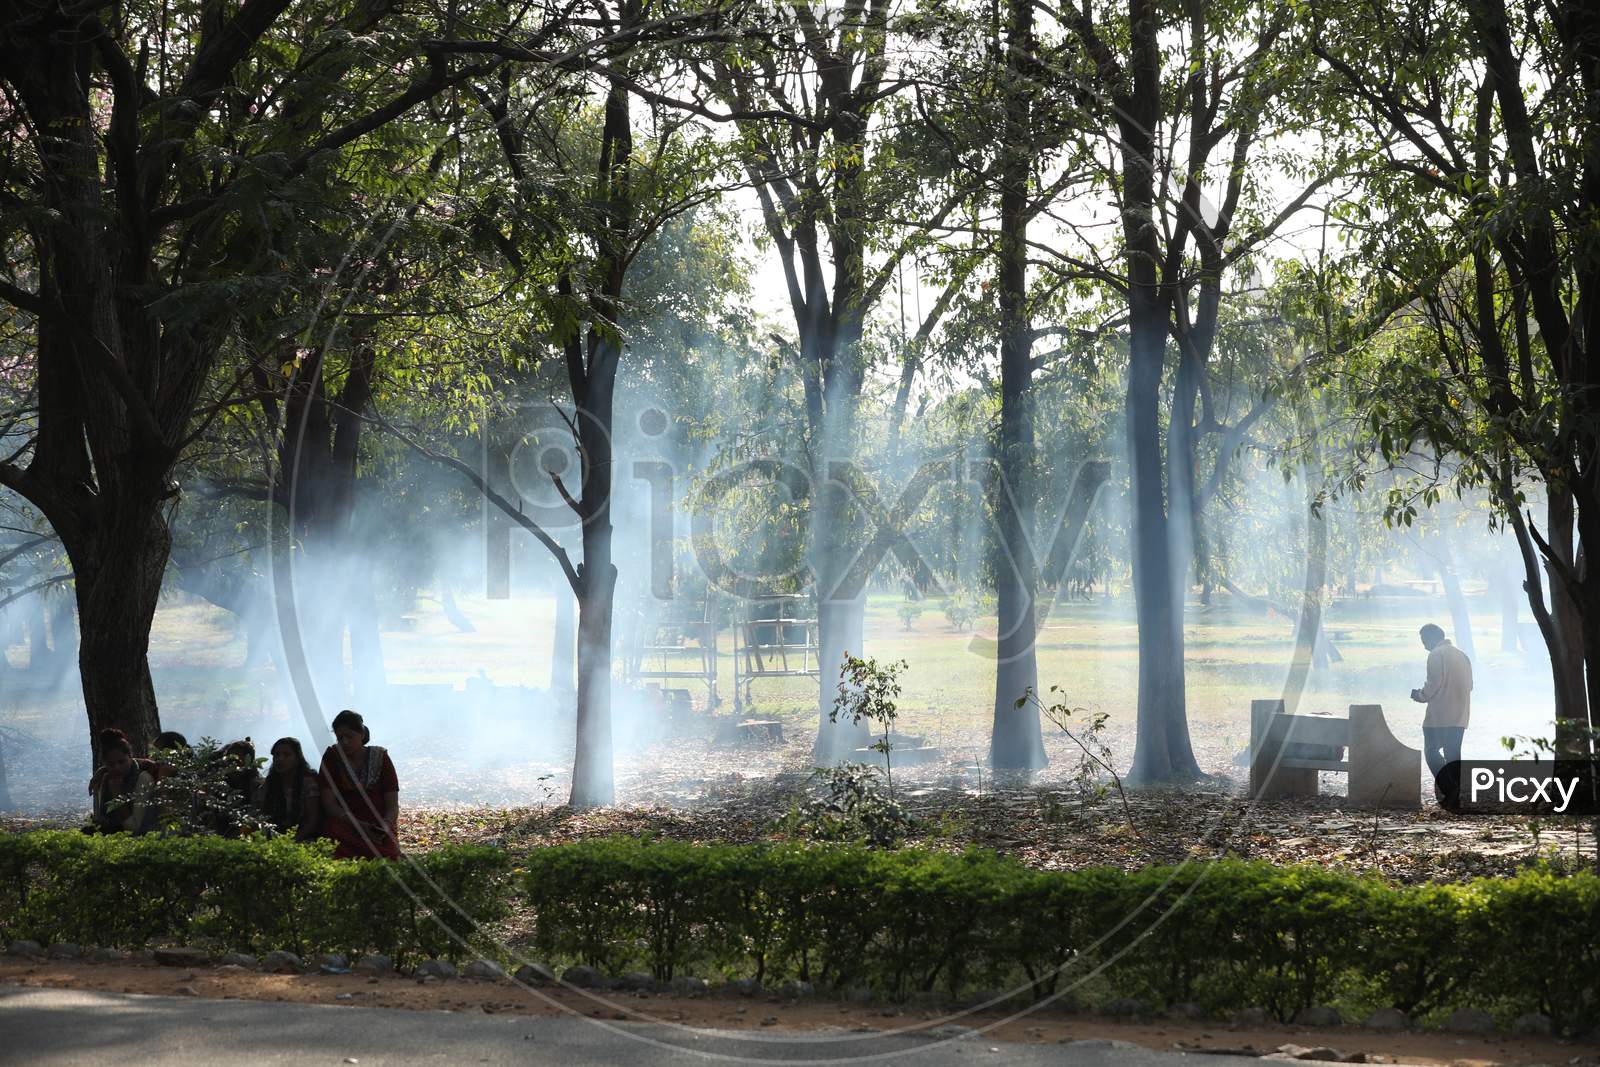 Smoke In a Park By Firing Dried Leafs